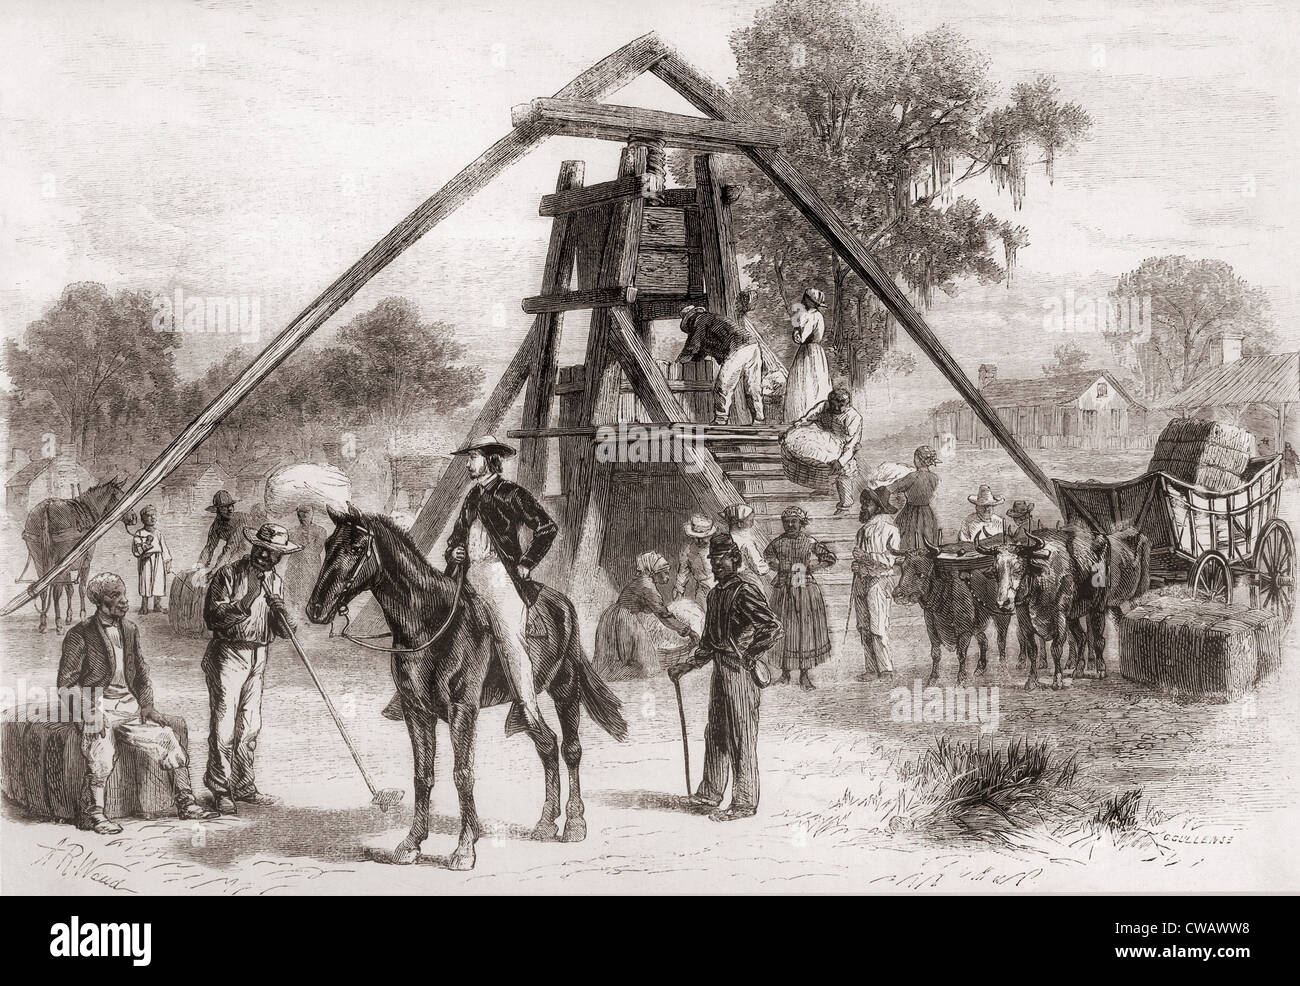 Cotton press in operation in the South after the U.S. Civil War. The machine had a large vertical screw turned by horses or Stock Photo